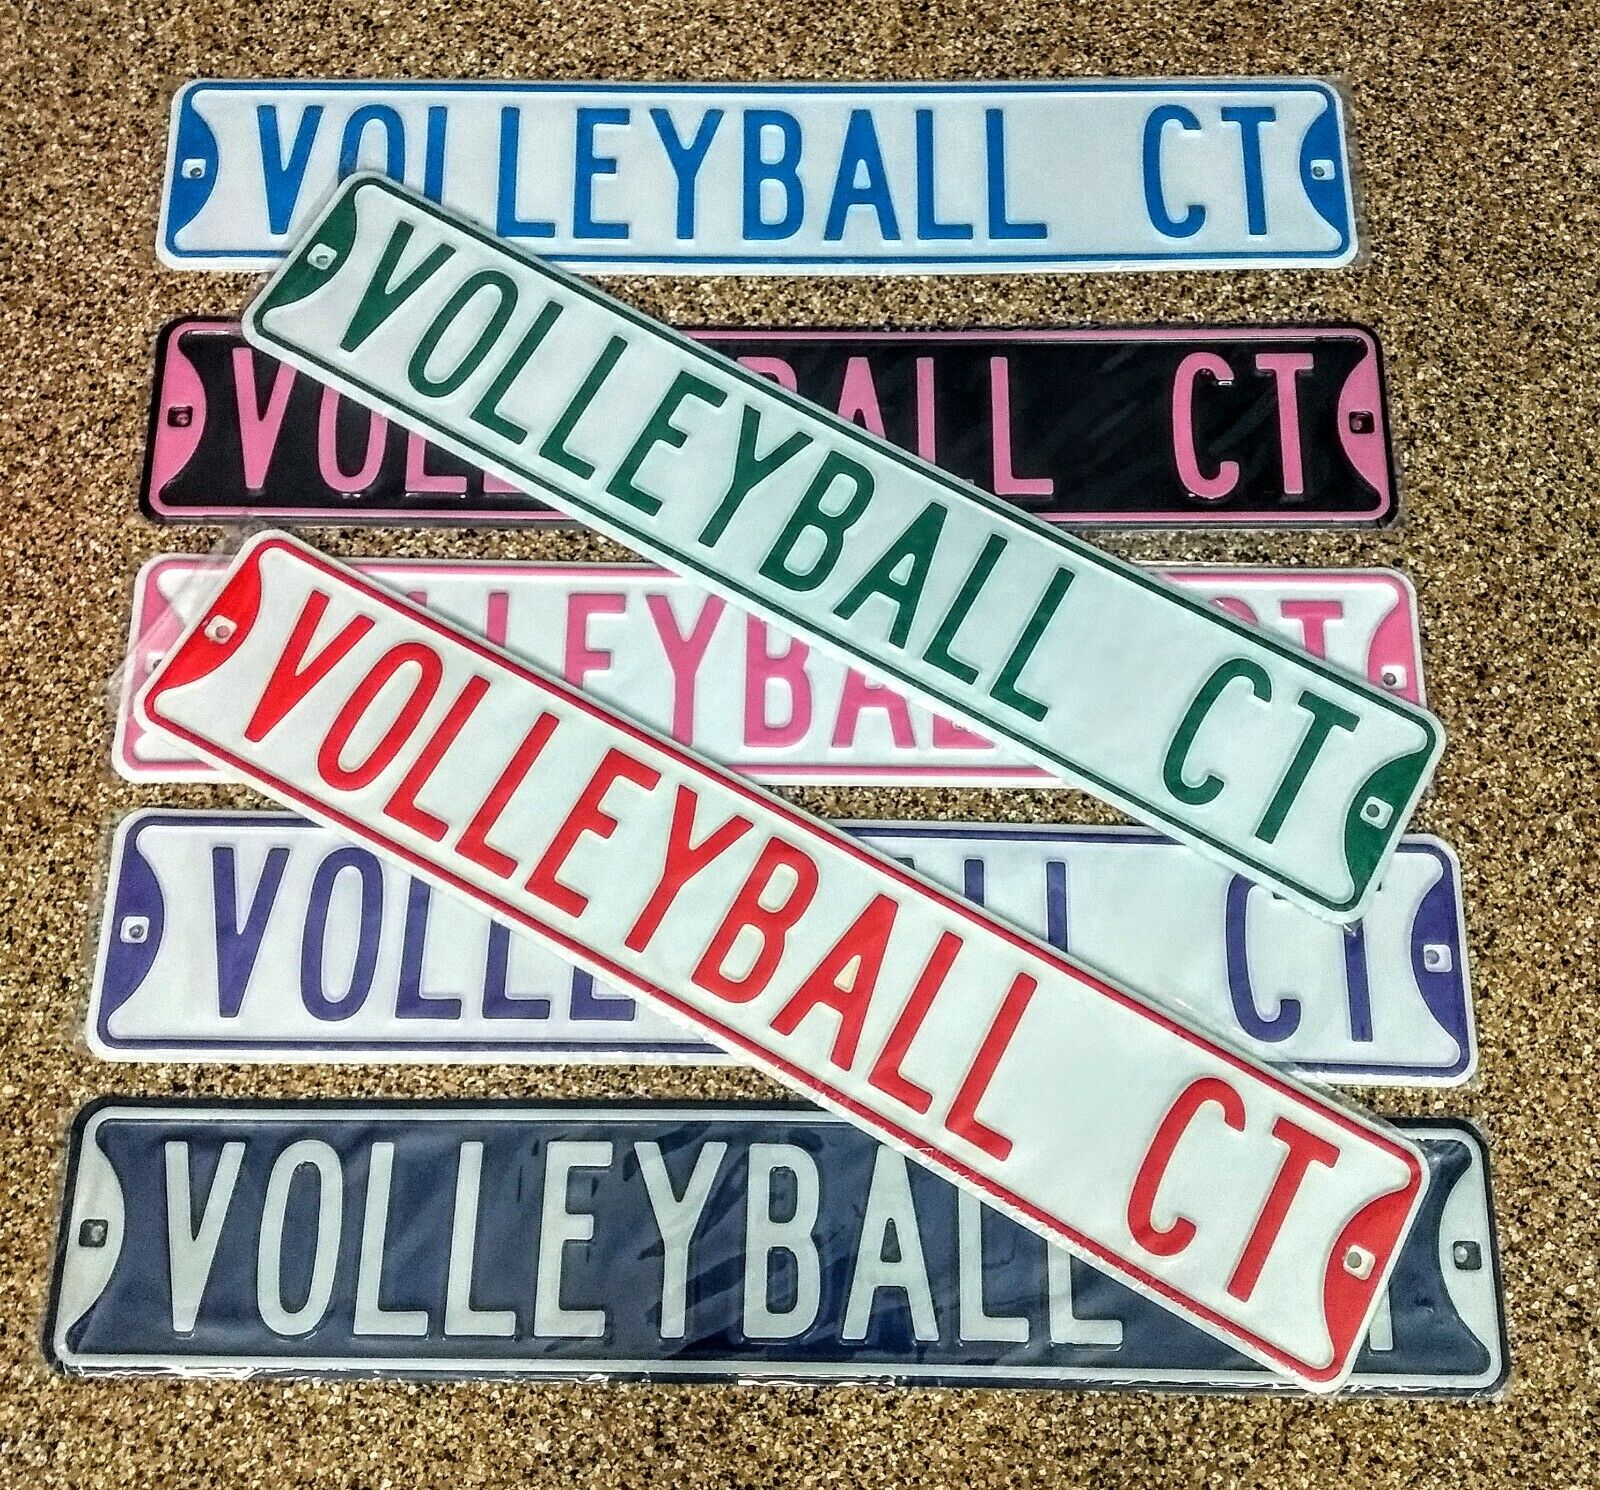 Volleyball Ct Sports Street Sign Wall Art Decor Gift Galvanized Steel Embossed